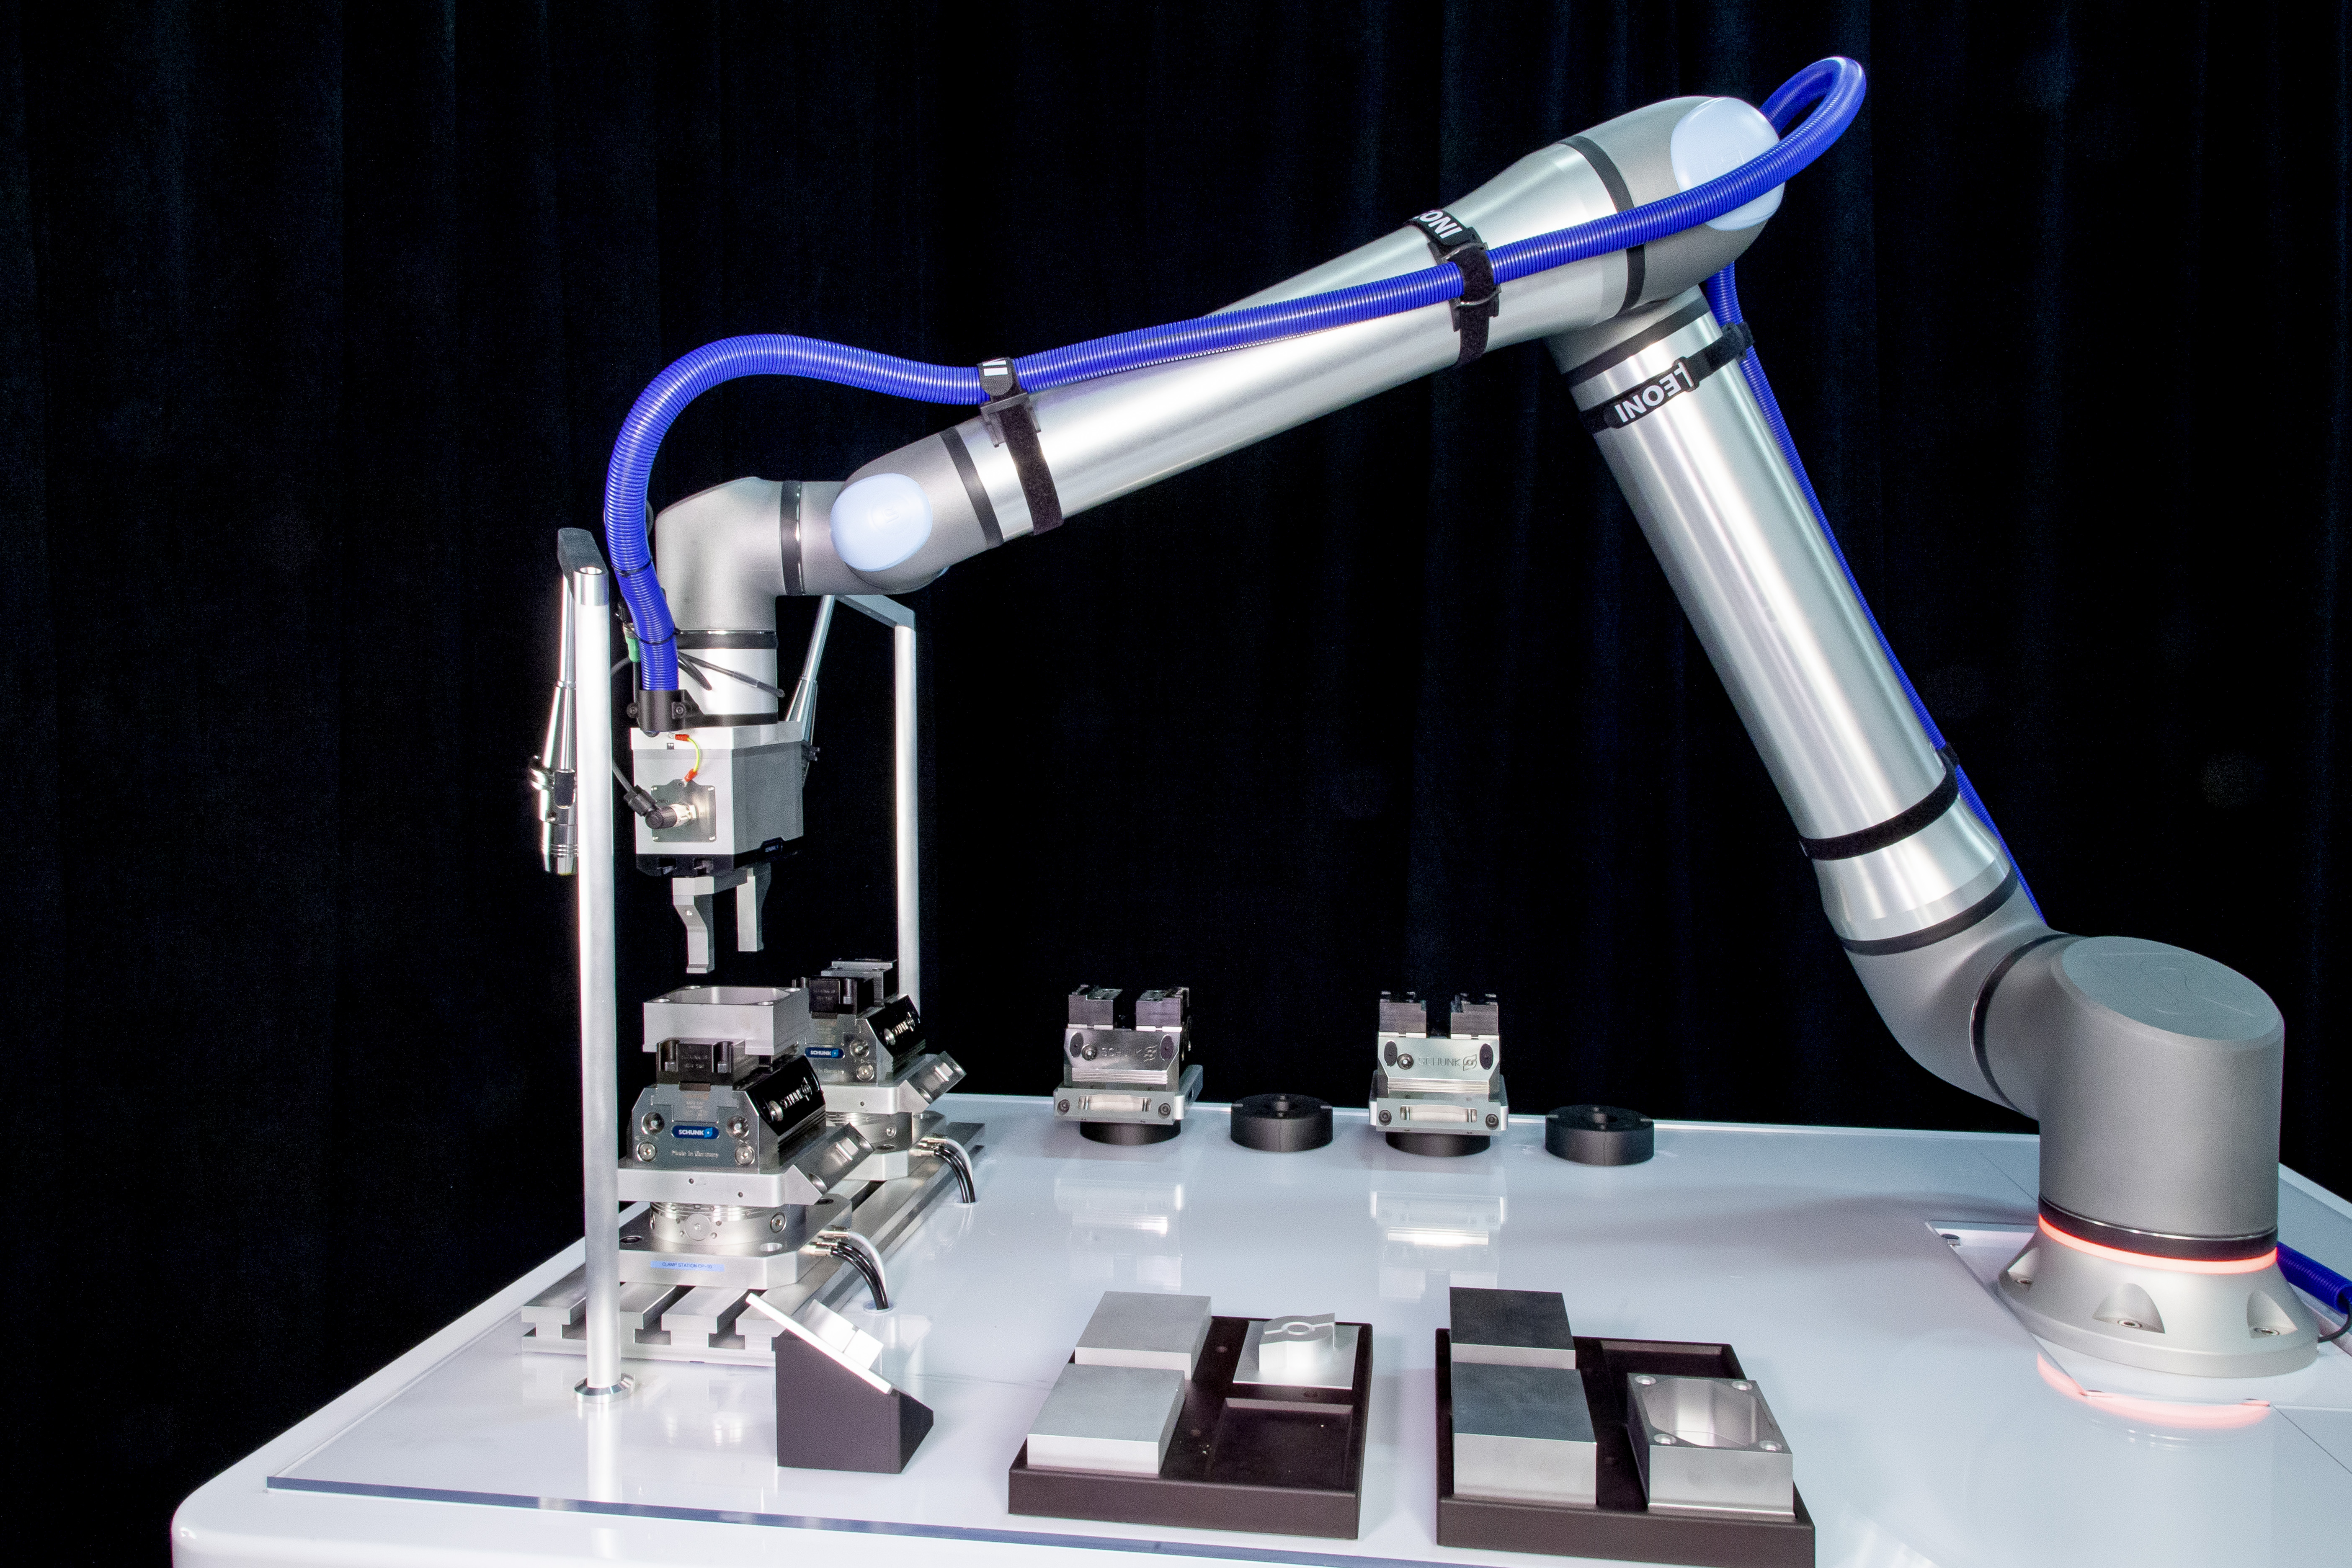 Universal Robots' New UR20 Collaborative Robot Makes U.S. IMTS 2022, Expanding Automation in Machining Industry | Business Wire